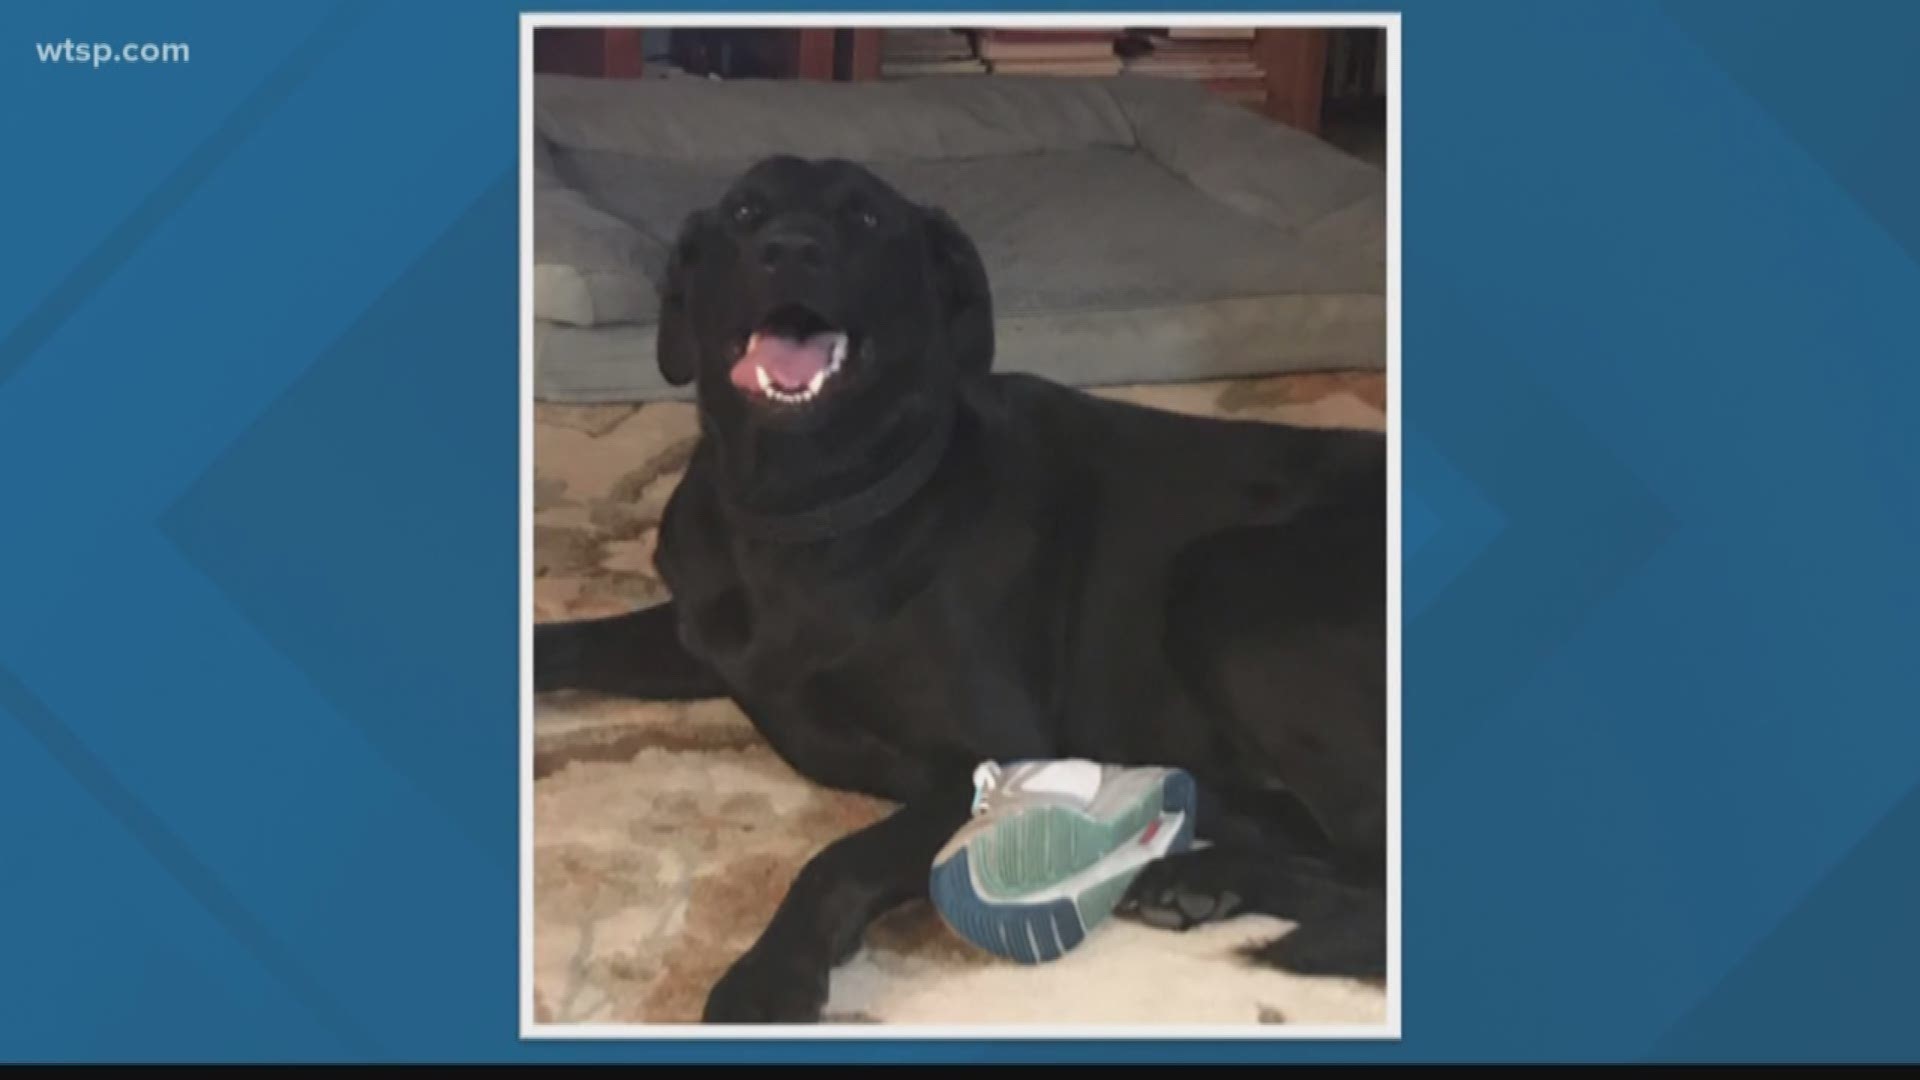 A black Lab named George is recovering after he came face-to-face with an alligator Wednesday in Lutz. 

The Florida Fish and Wildlife Conservation Commission said they received a report of a call about a nuisance alligator at North Lake Park Trail in Lutz involving a dog.